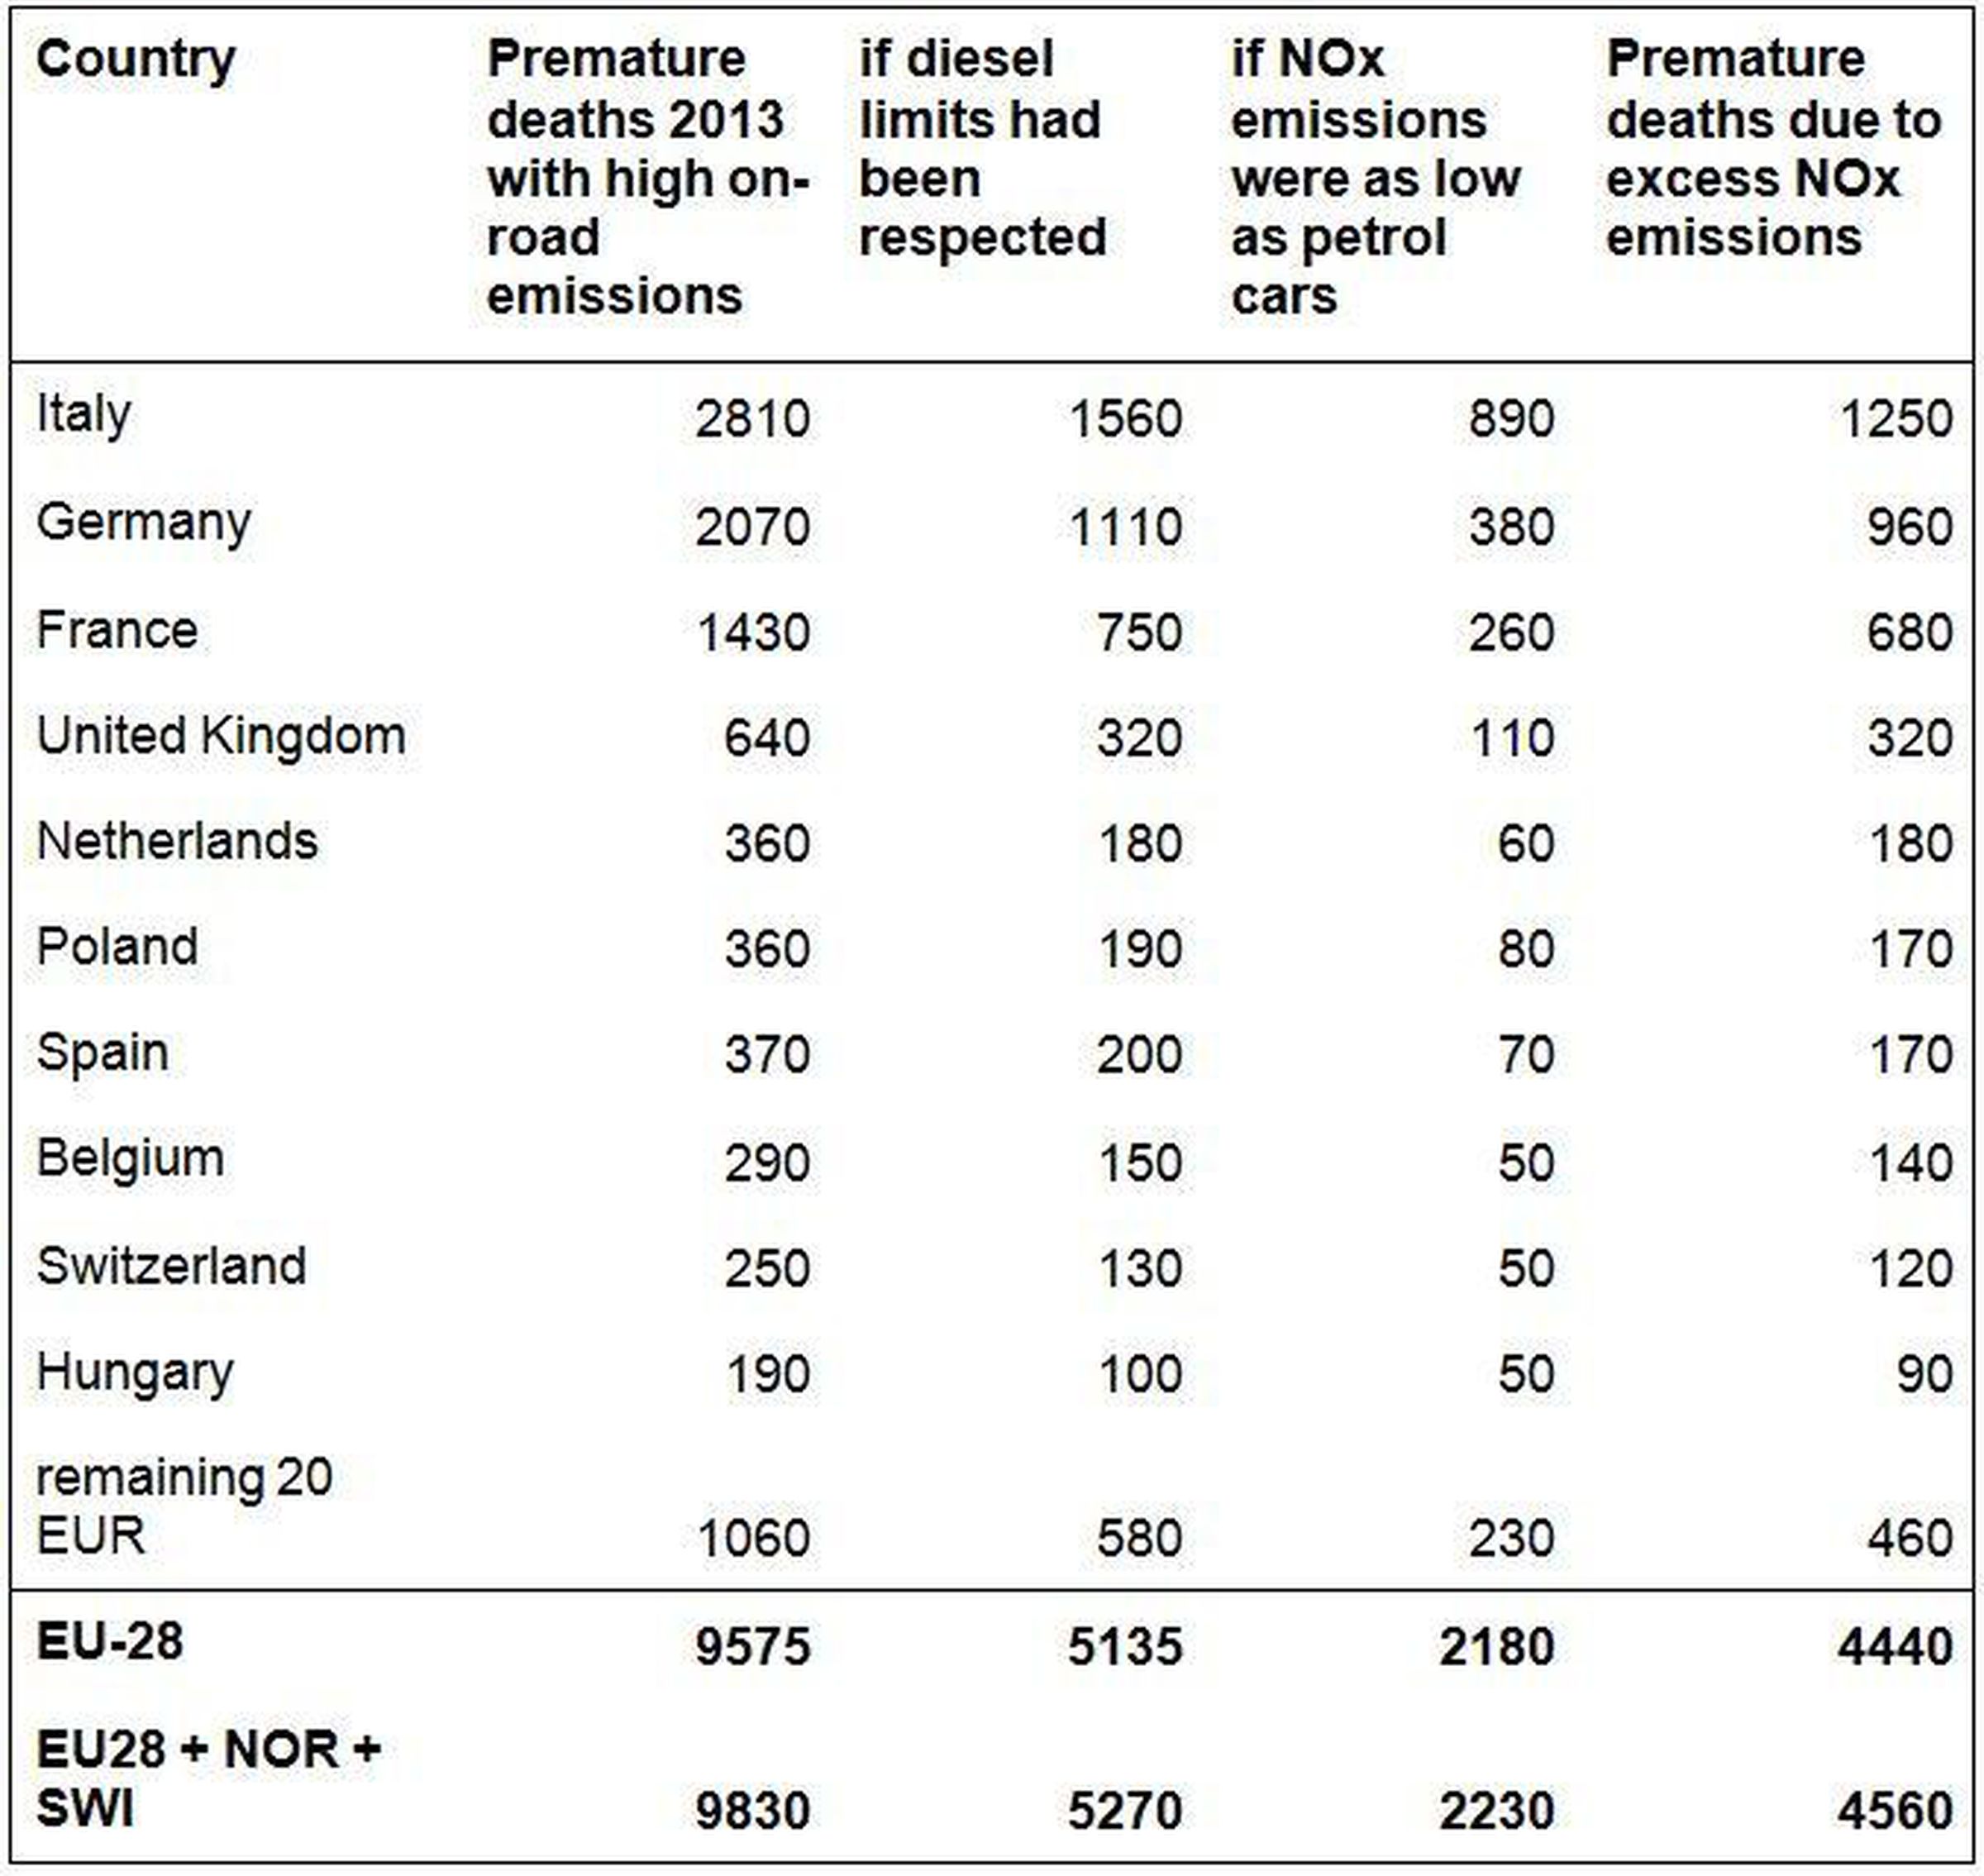 Estimated premature deaths by country due to NOx from diesel cars, vans, and light commercial vehicles.